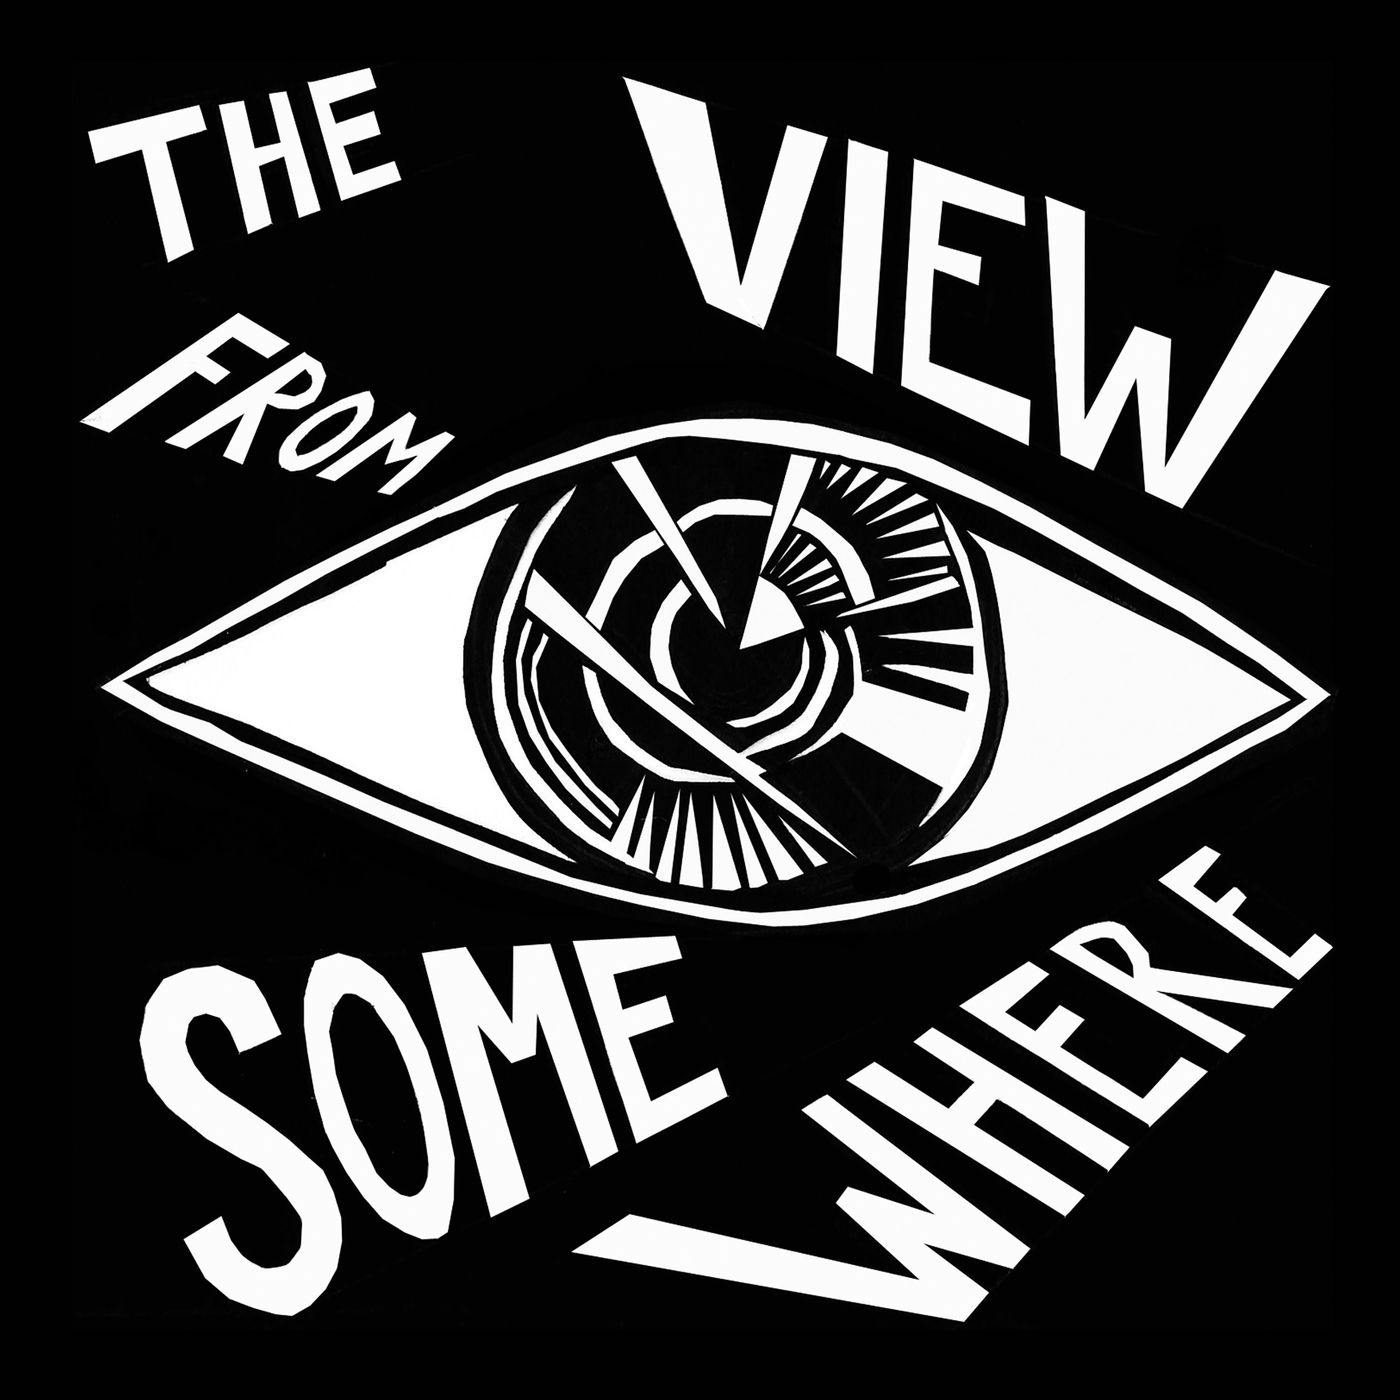 Welcome to The View From Somewhere